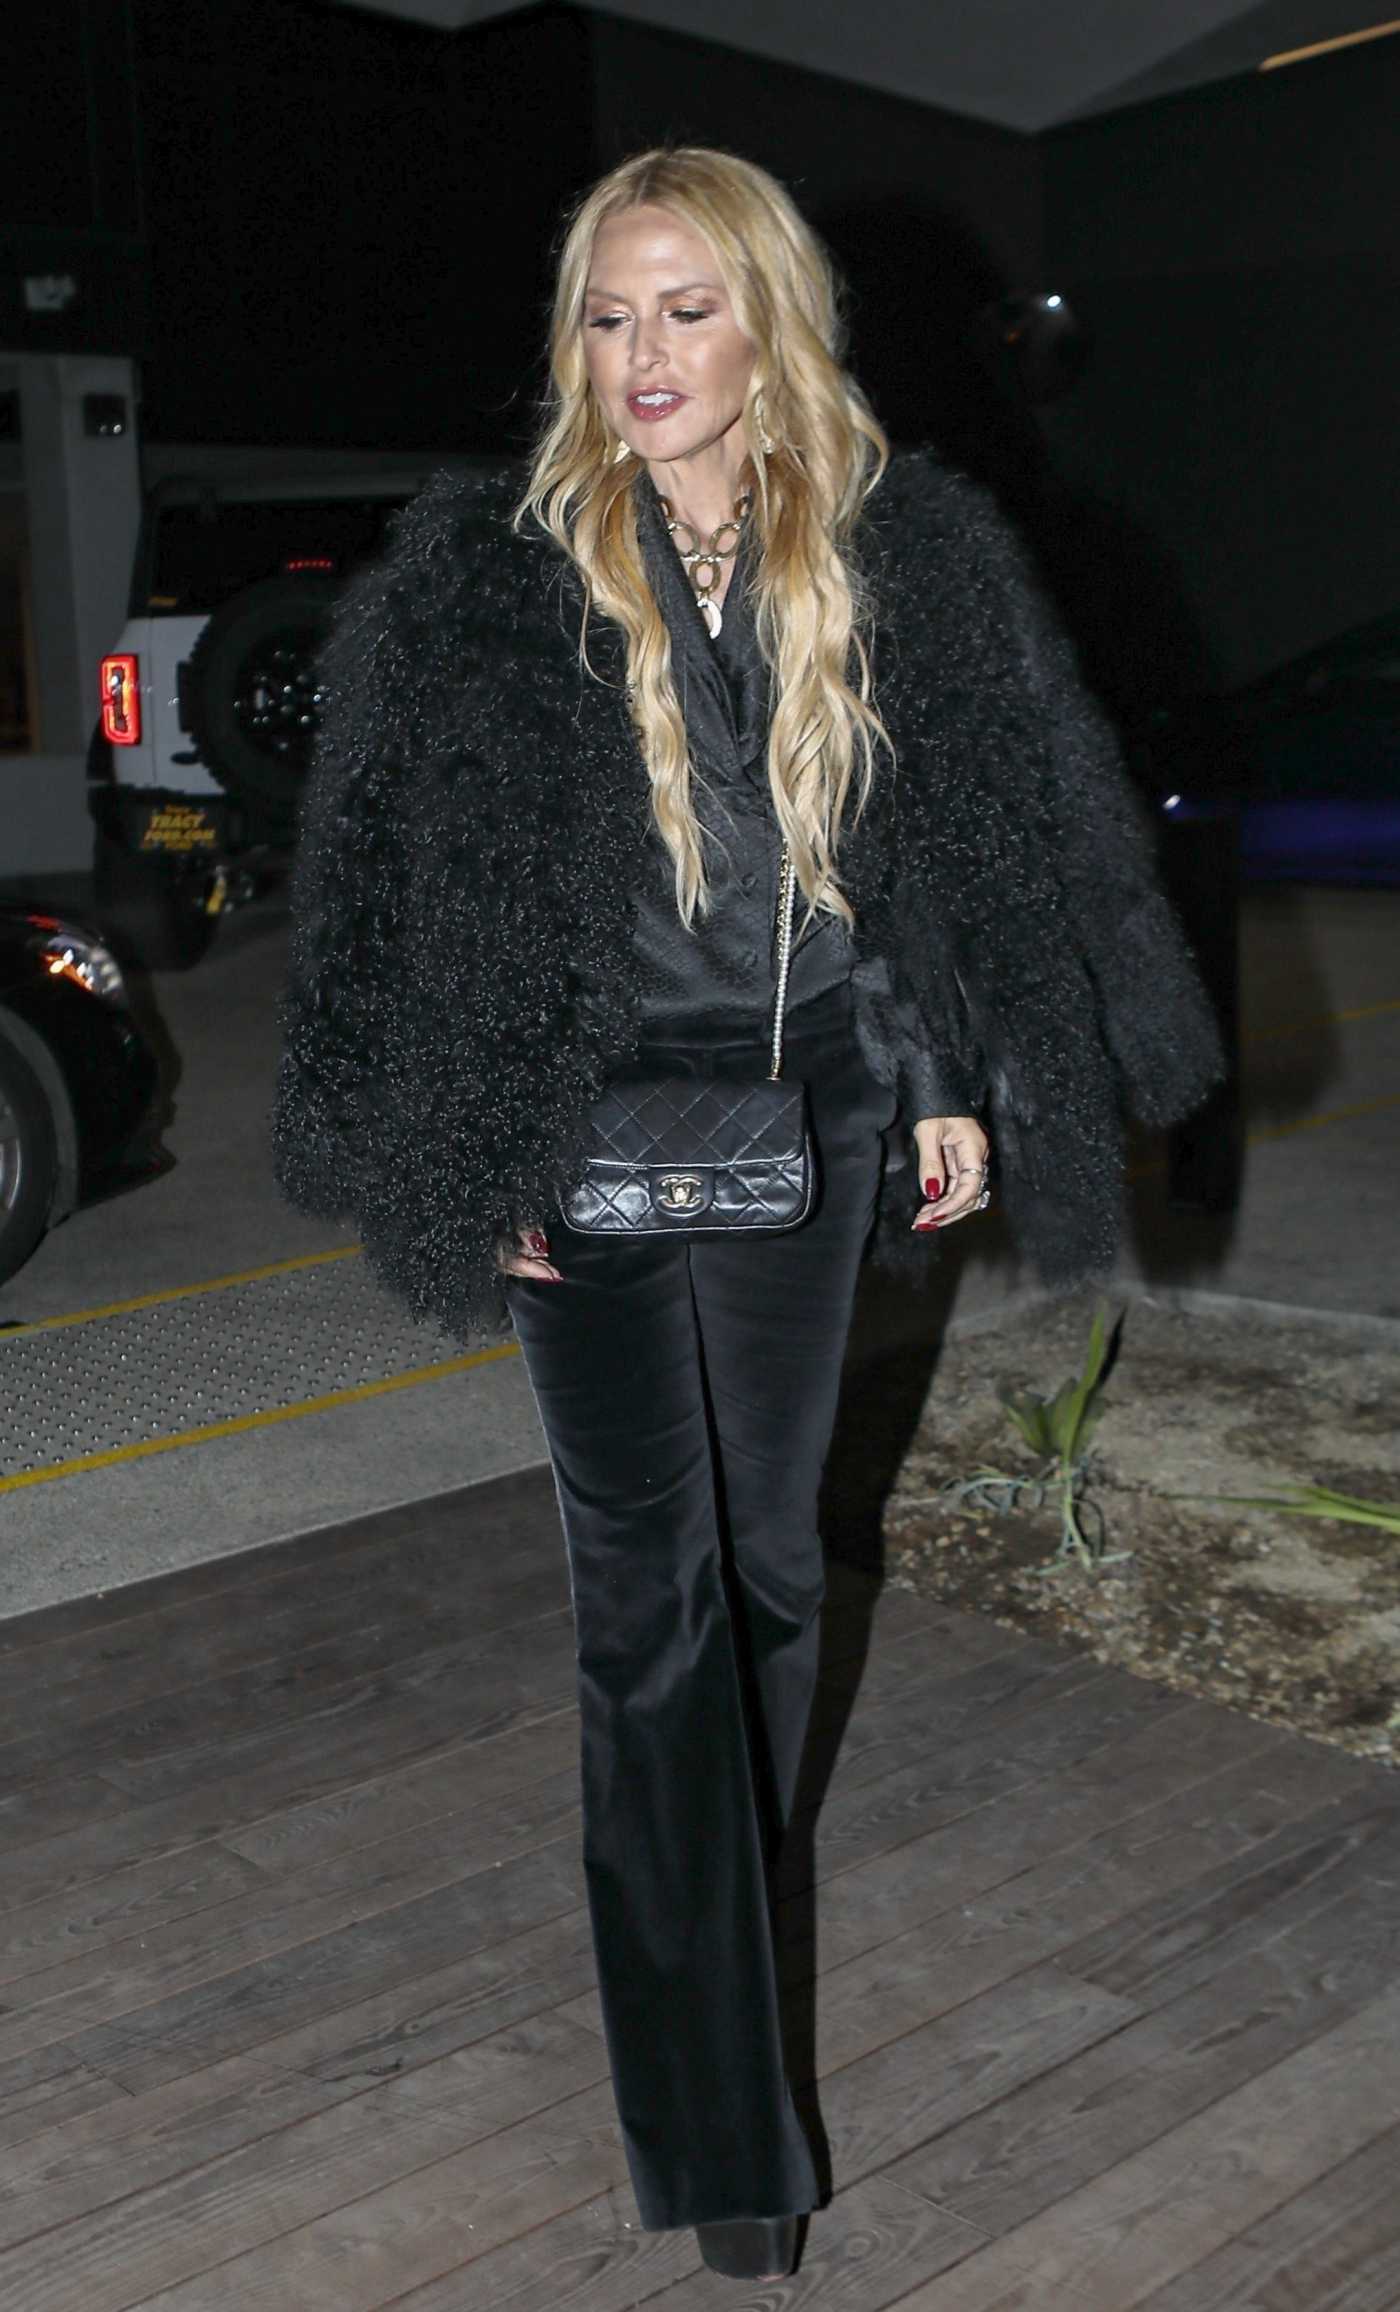 Rachel Zoe in a Black Outfit Arrives at Cade Hudson's Birthday Party in Santa Monica 01/07/2023